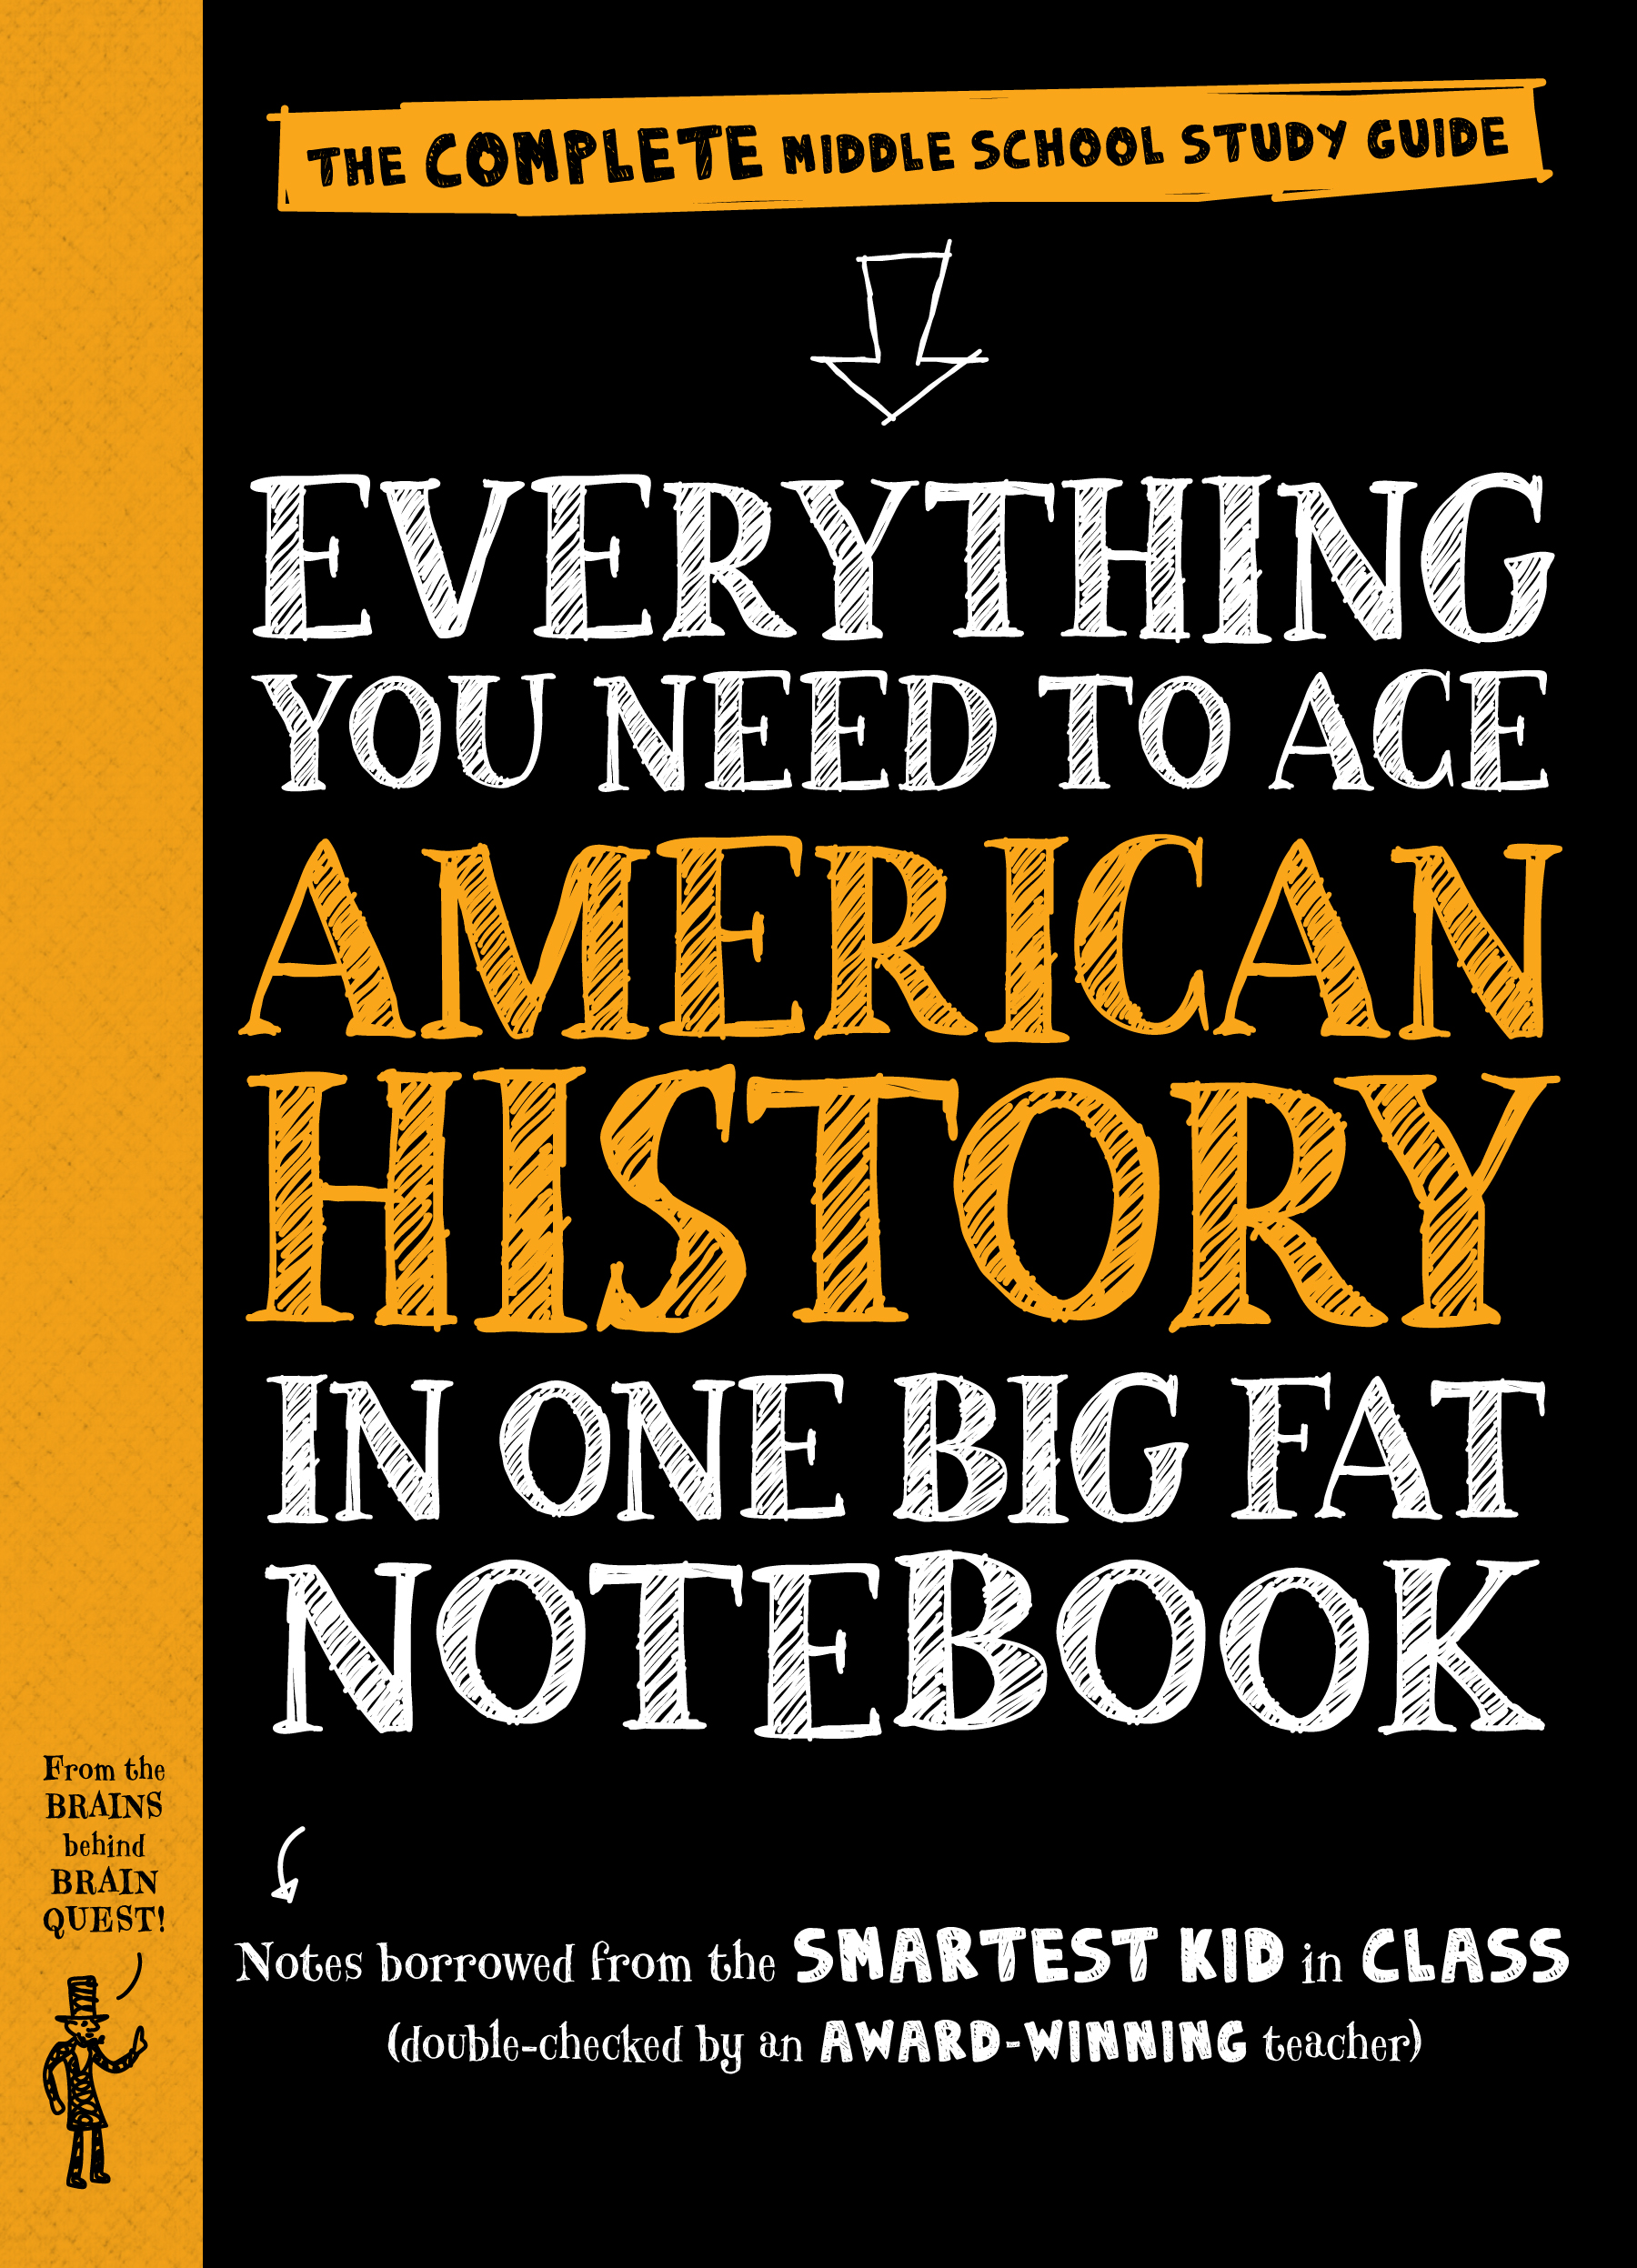 Middle school just got easier with Big Fat Notebooks, a series of five study guides perfect for your middle schooler.